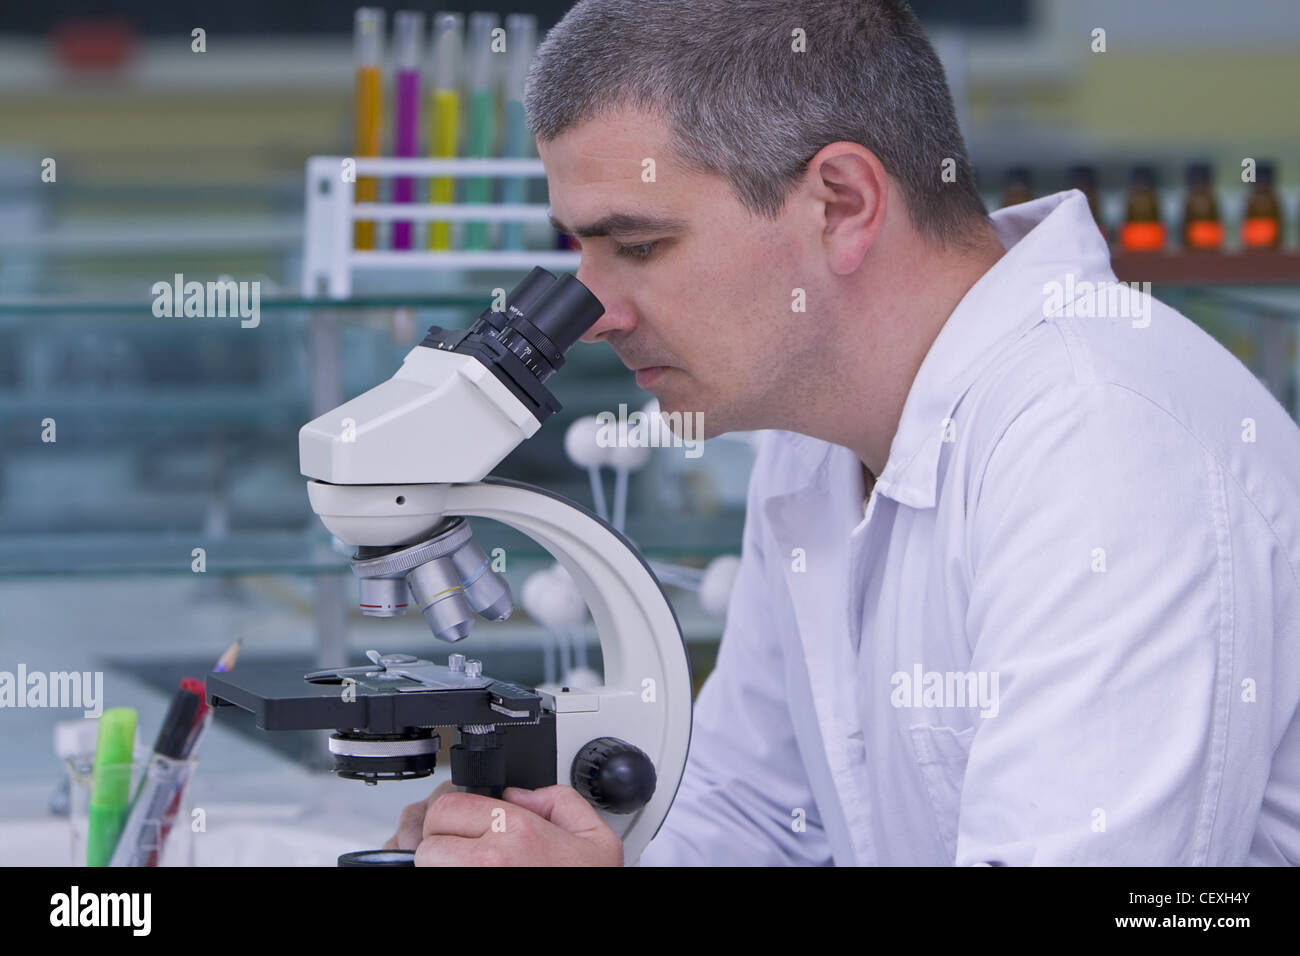 Male researcher looking through a microscope in a laboratory. Stock Photo